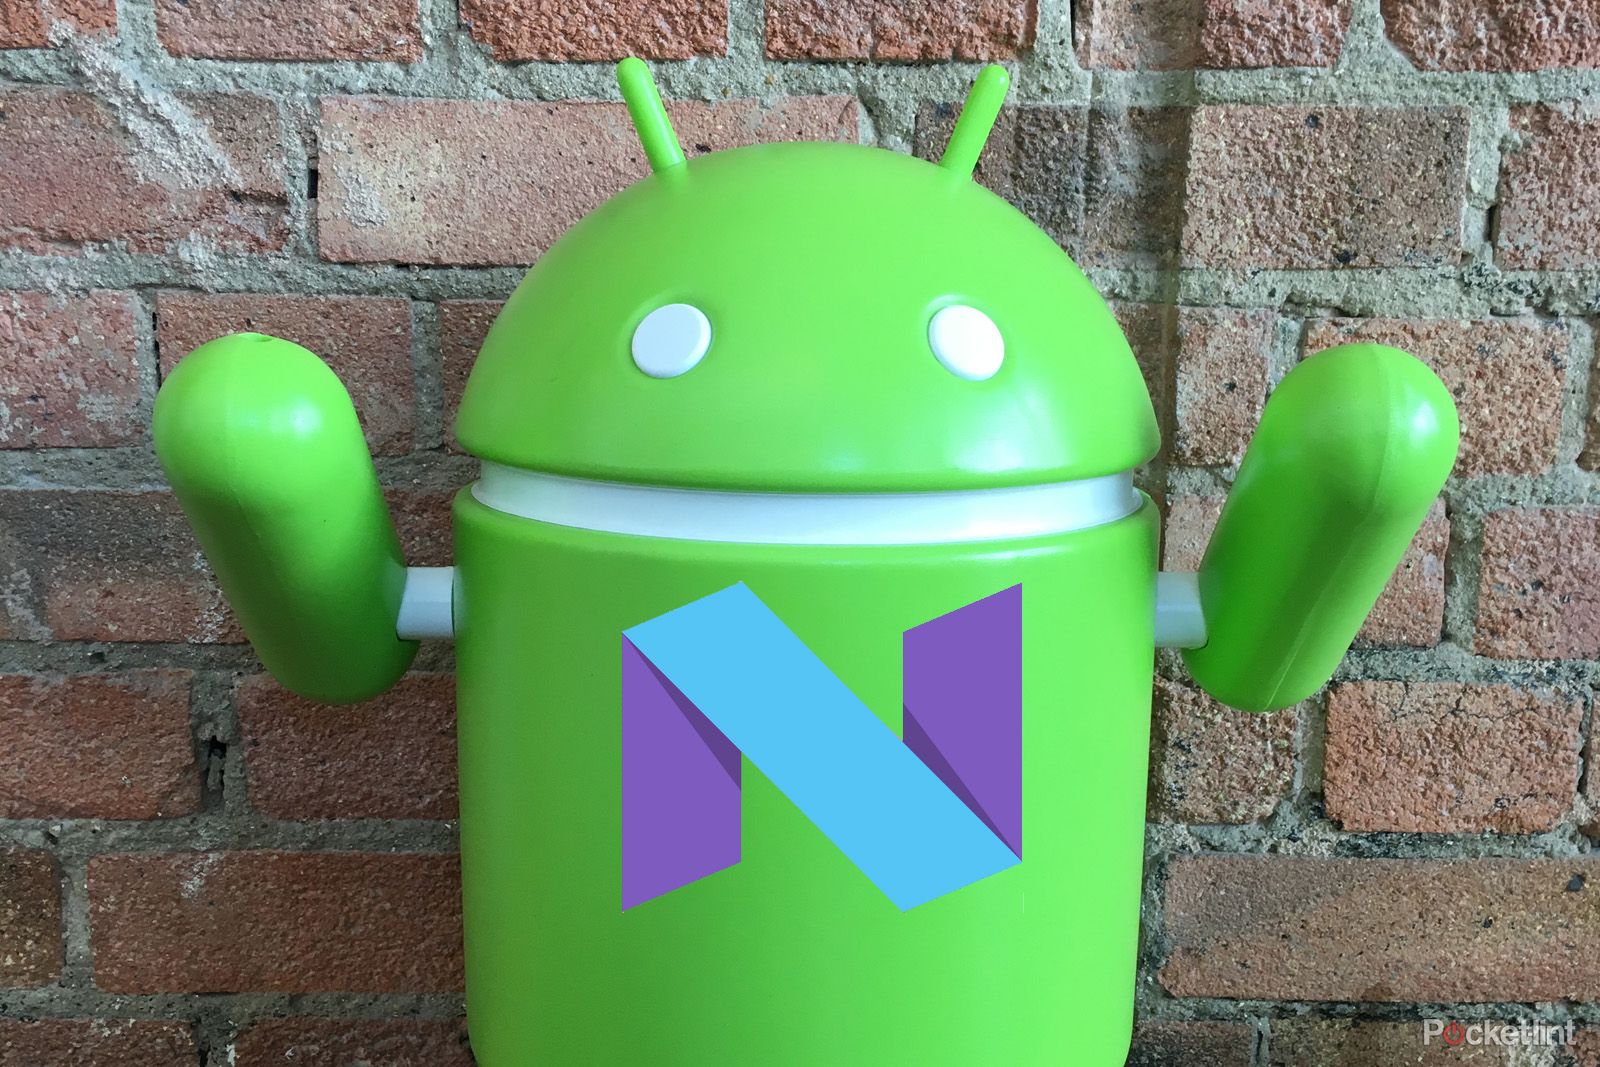 android nougat might release on 22 august for nexus 6p and 5x image 1